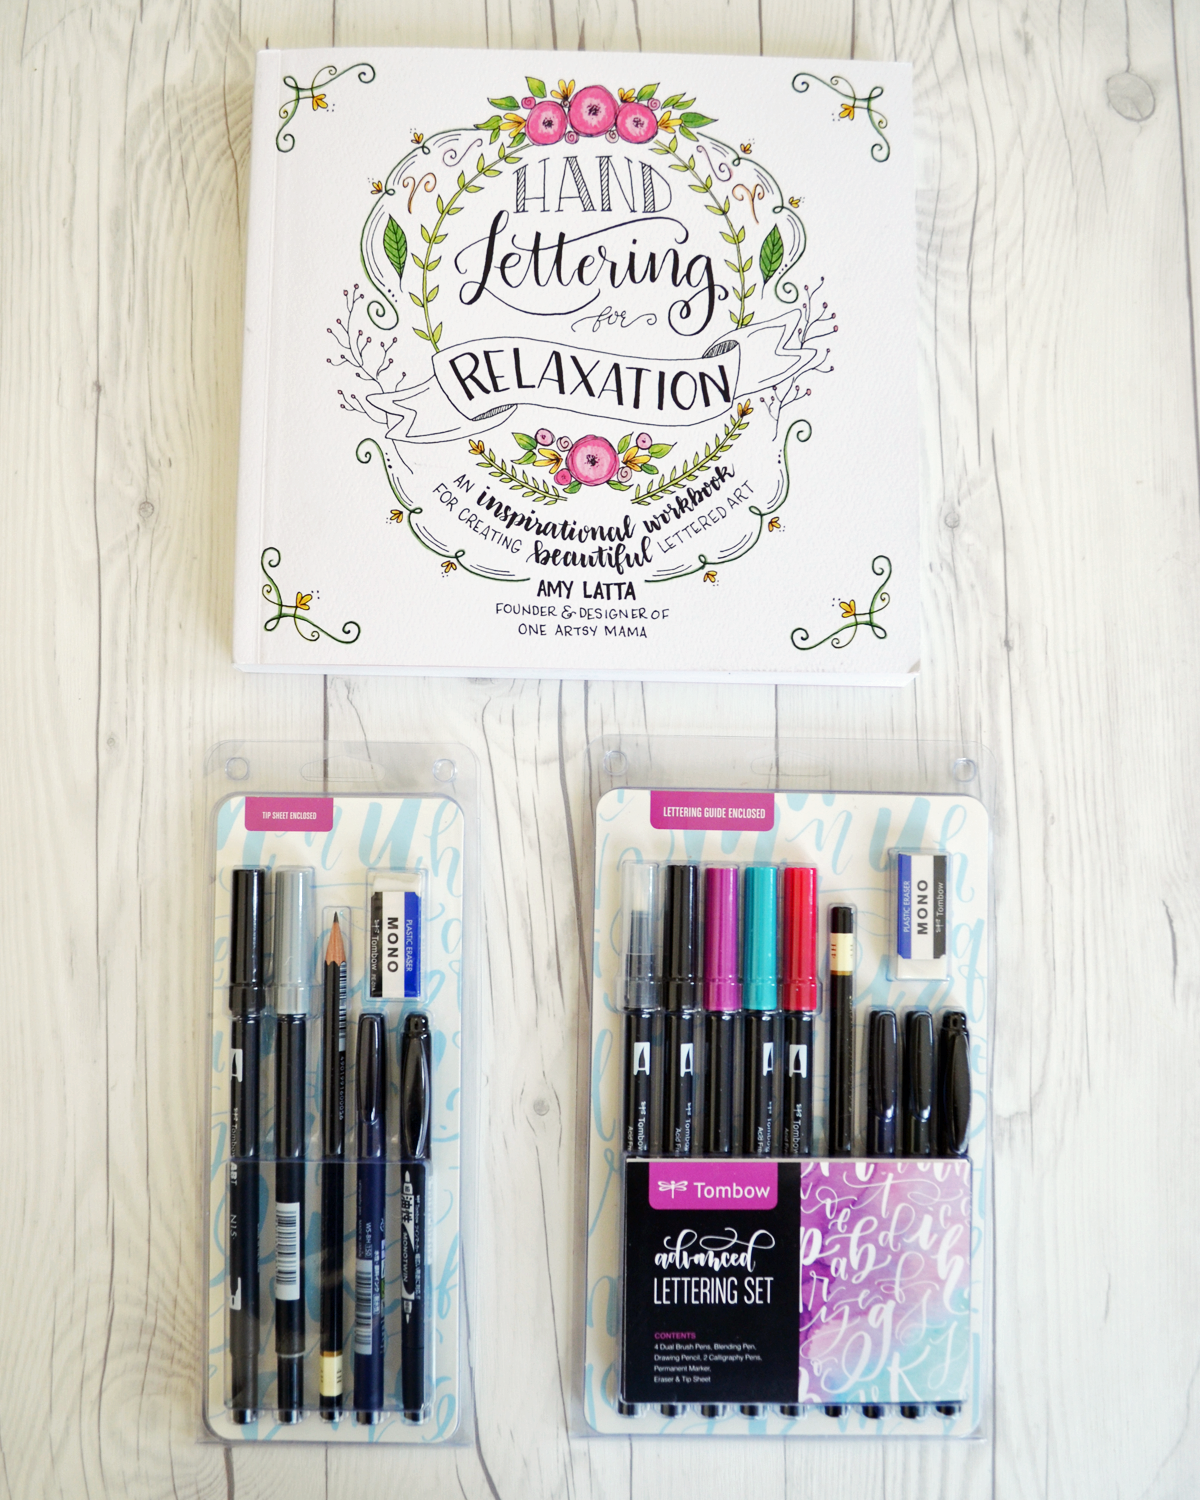 This incredible hand lettering book and the Tombow beginner and advanced lettering kits had me on my way to quickly improving my hand lettering skills!